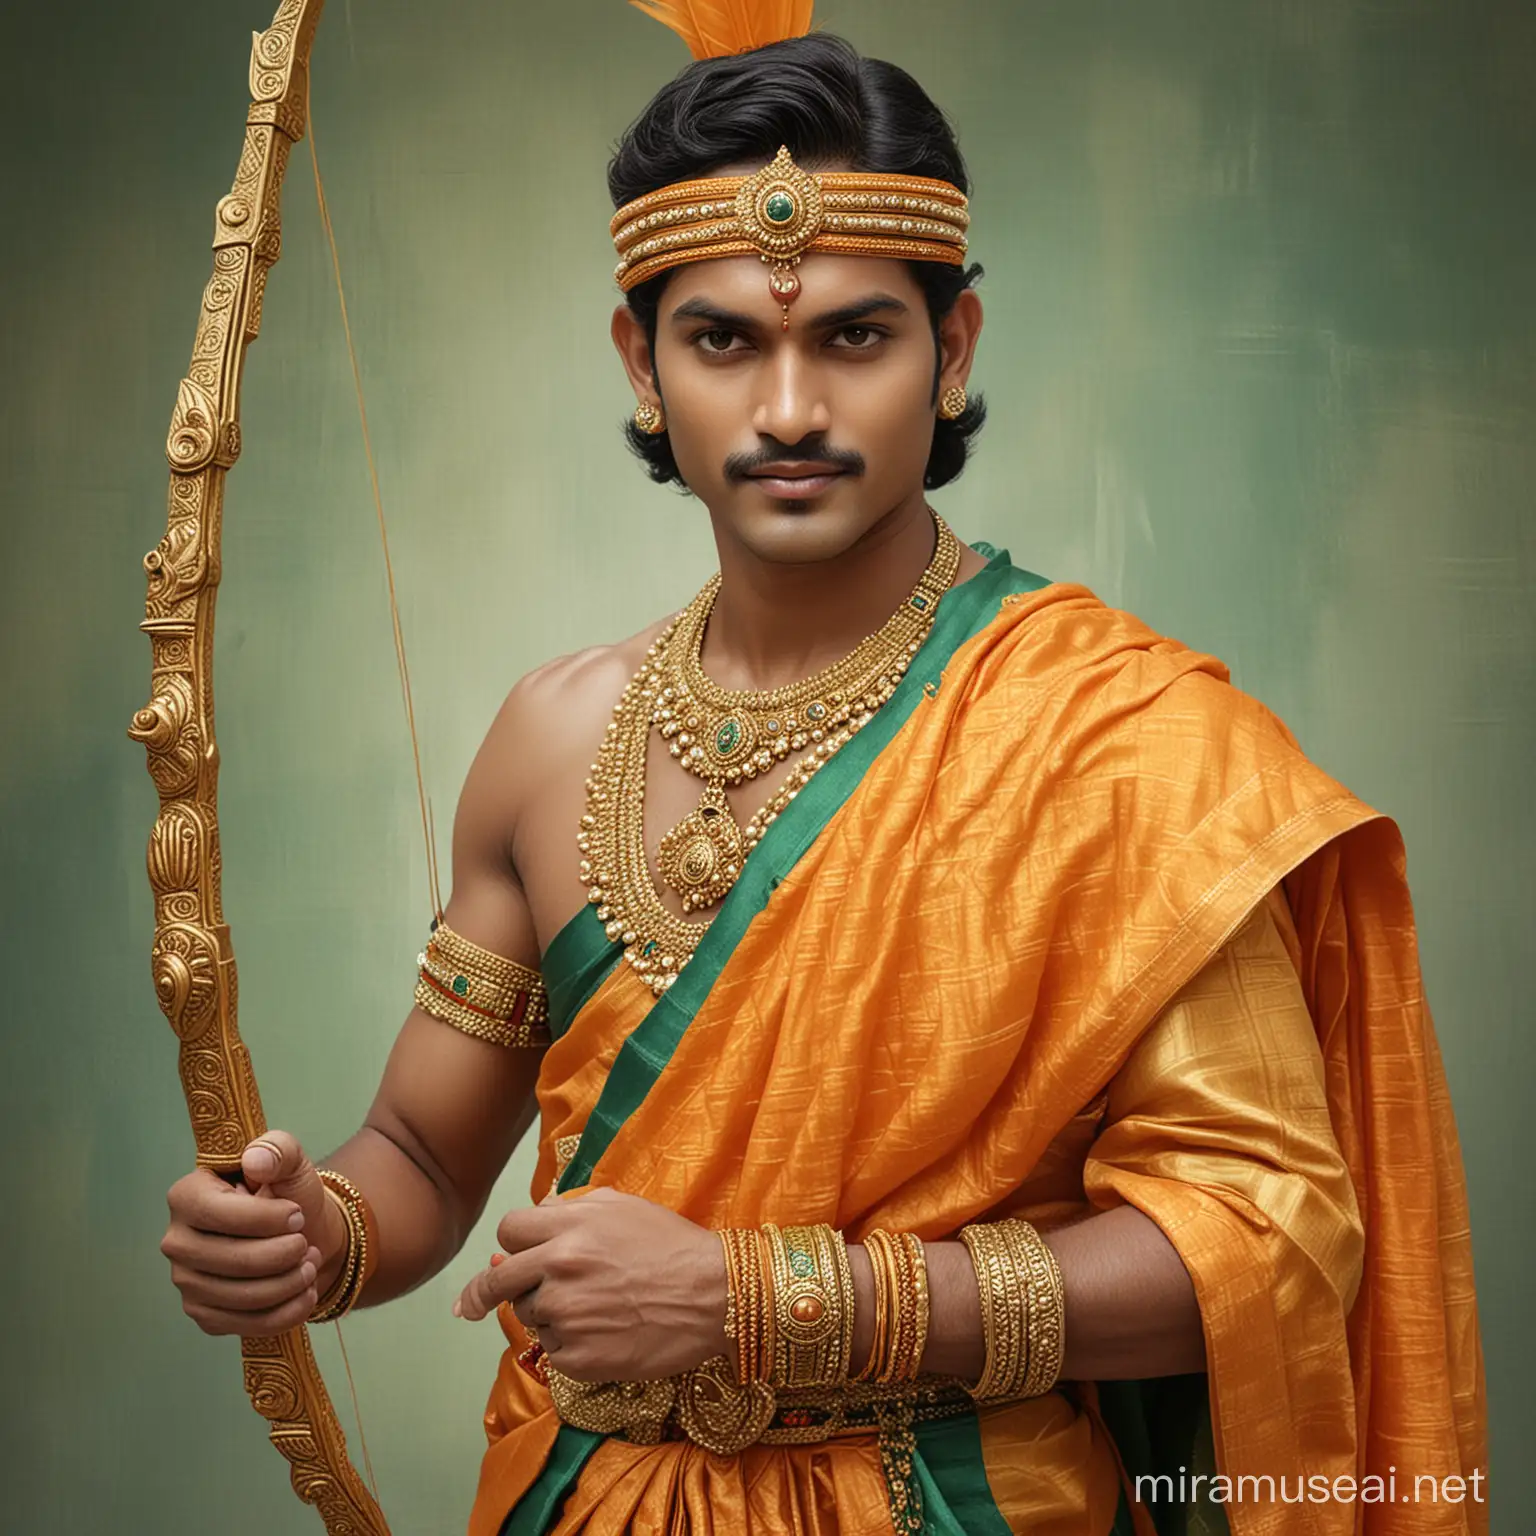 Charismatic Prince Rama Chandra in Traditional Golden Orange and Sea Green Ethnic Attire with Embellished Bow and Arrow